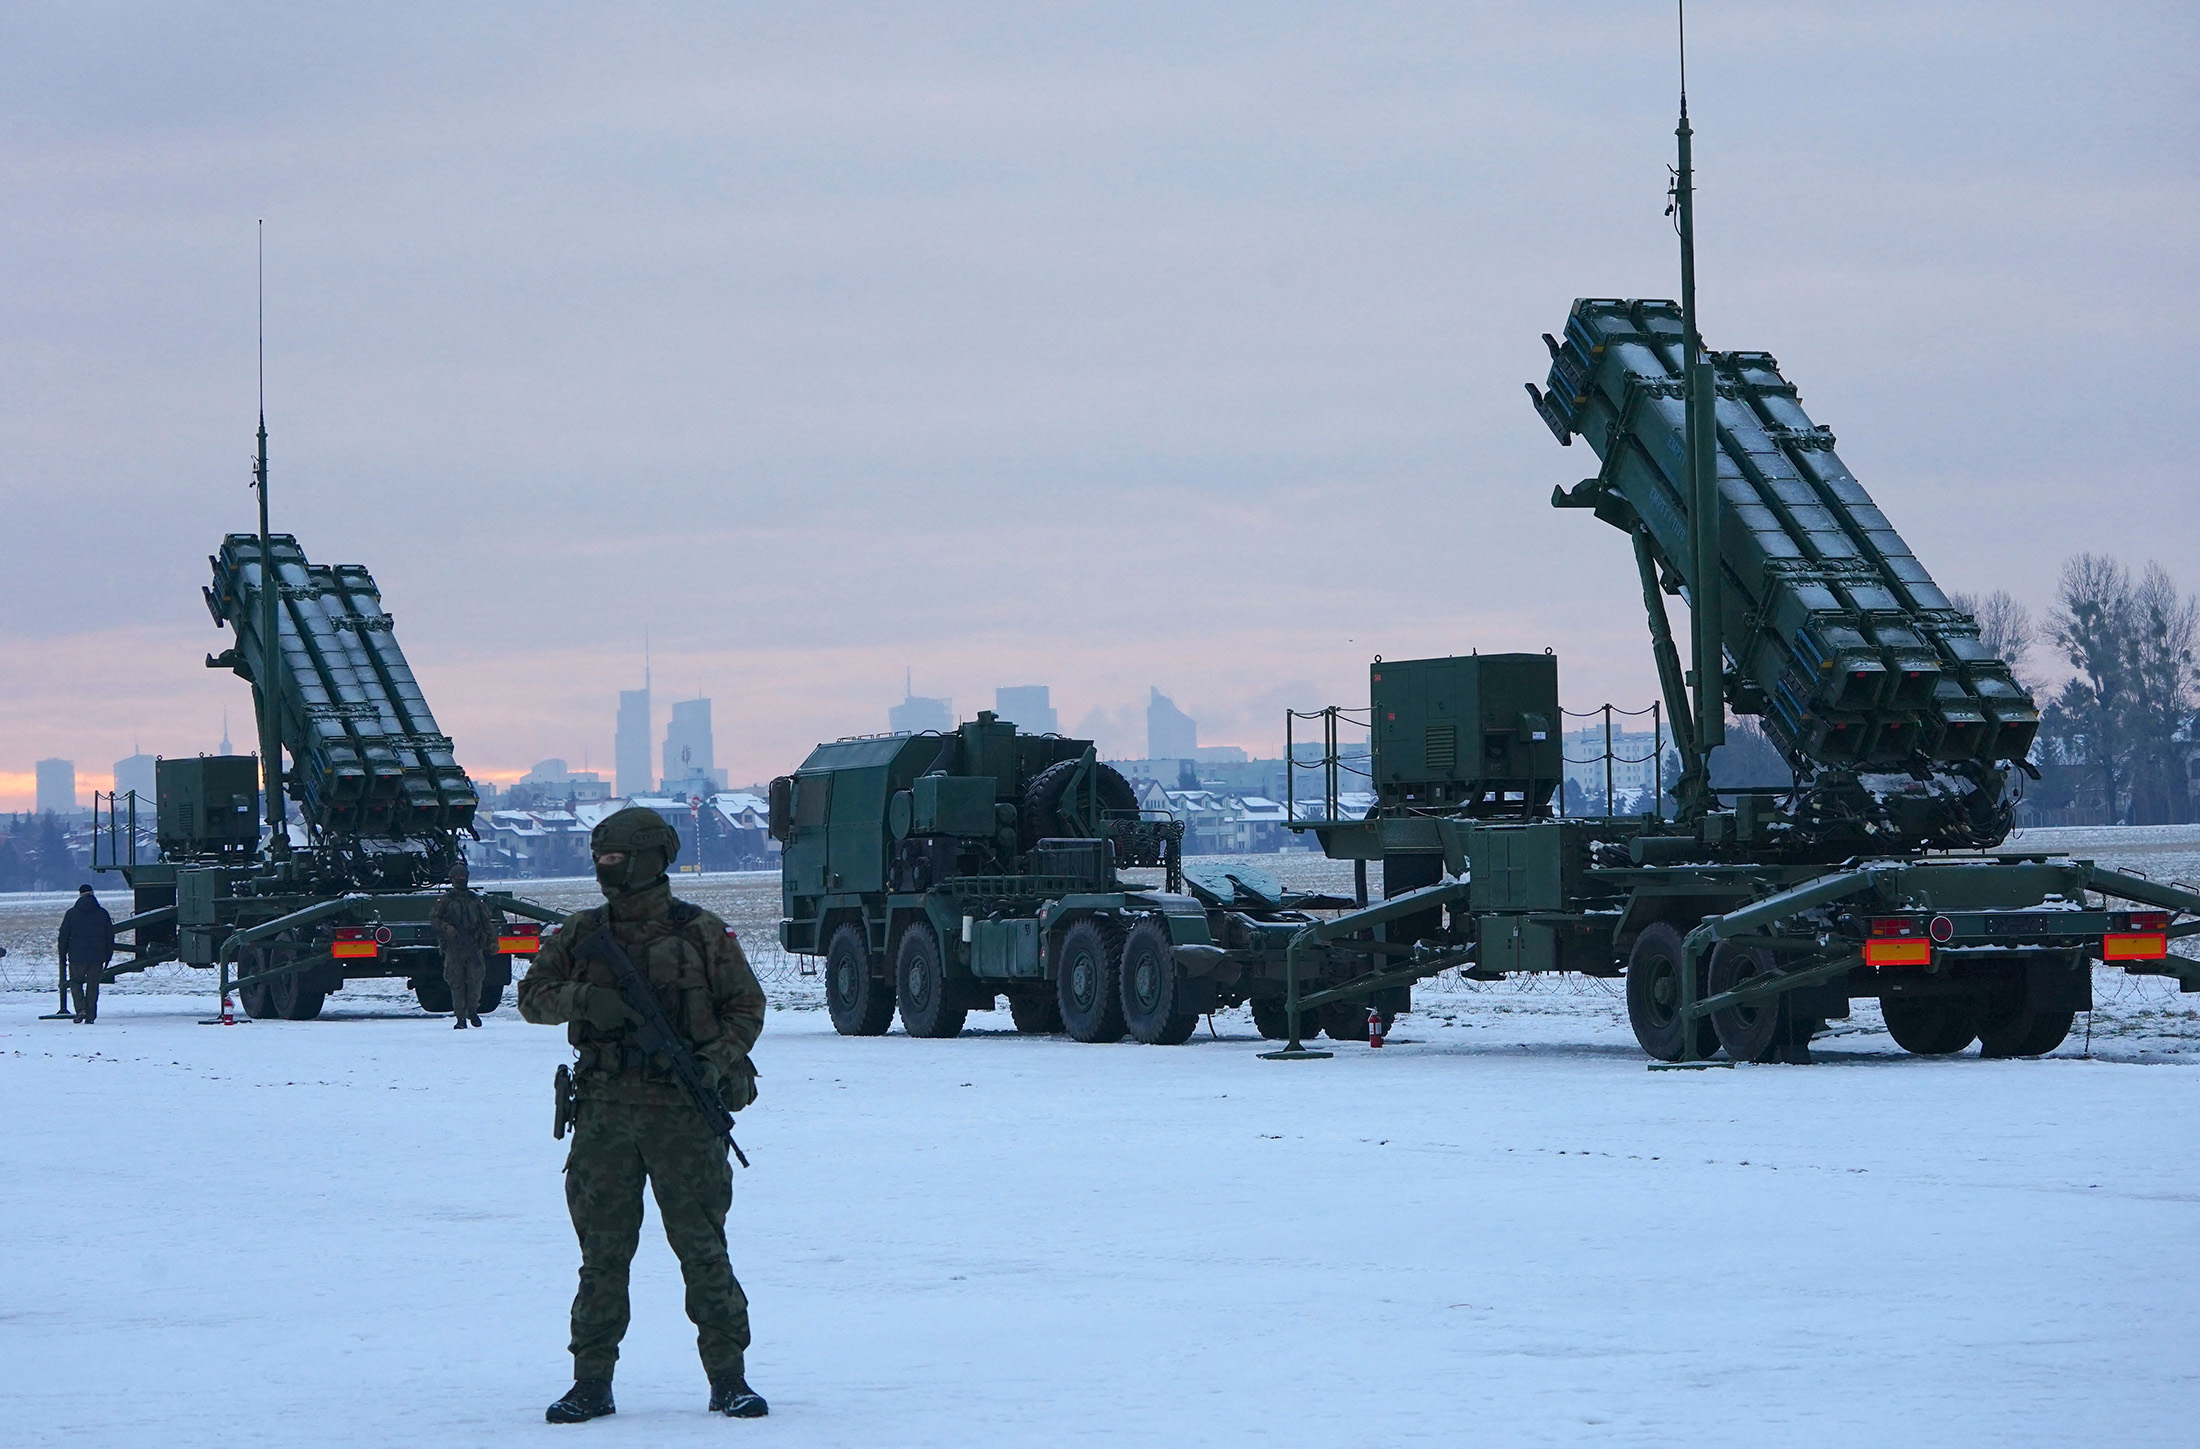 A soldier stands in front of Patriot&nbsp;surface-to-air missile systems during a military exercise at Warsaw Babice Airport, Poland on Feb. 7.&nbsp;